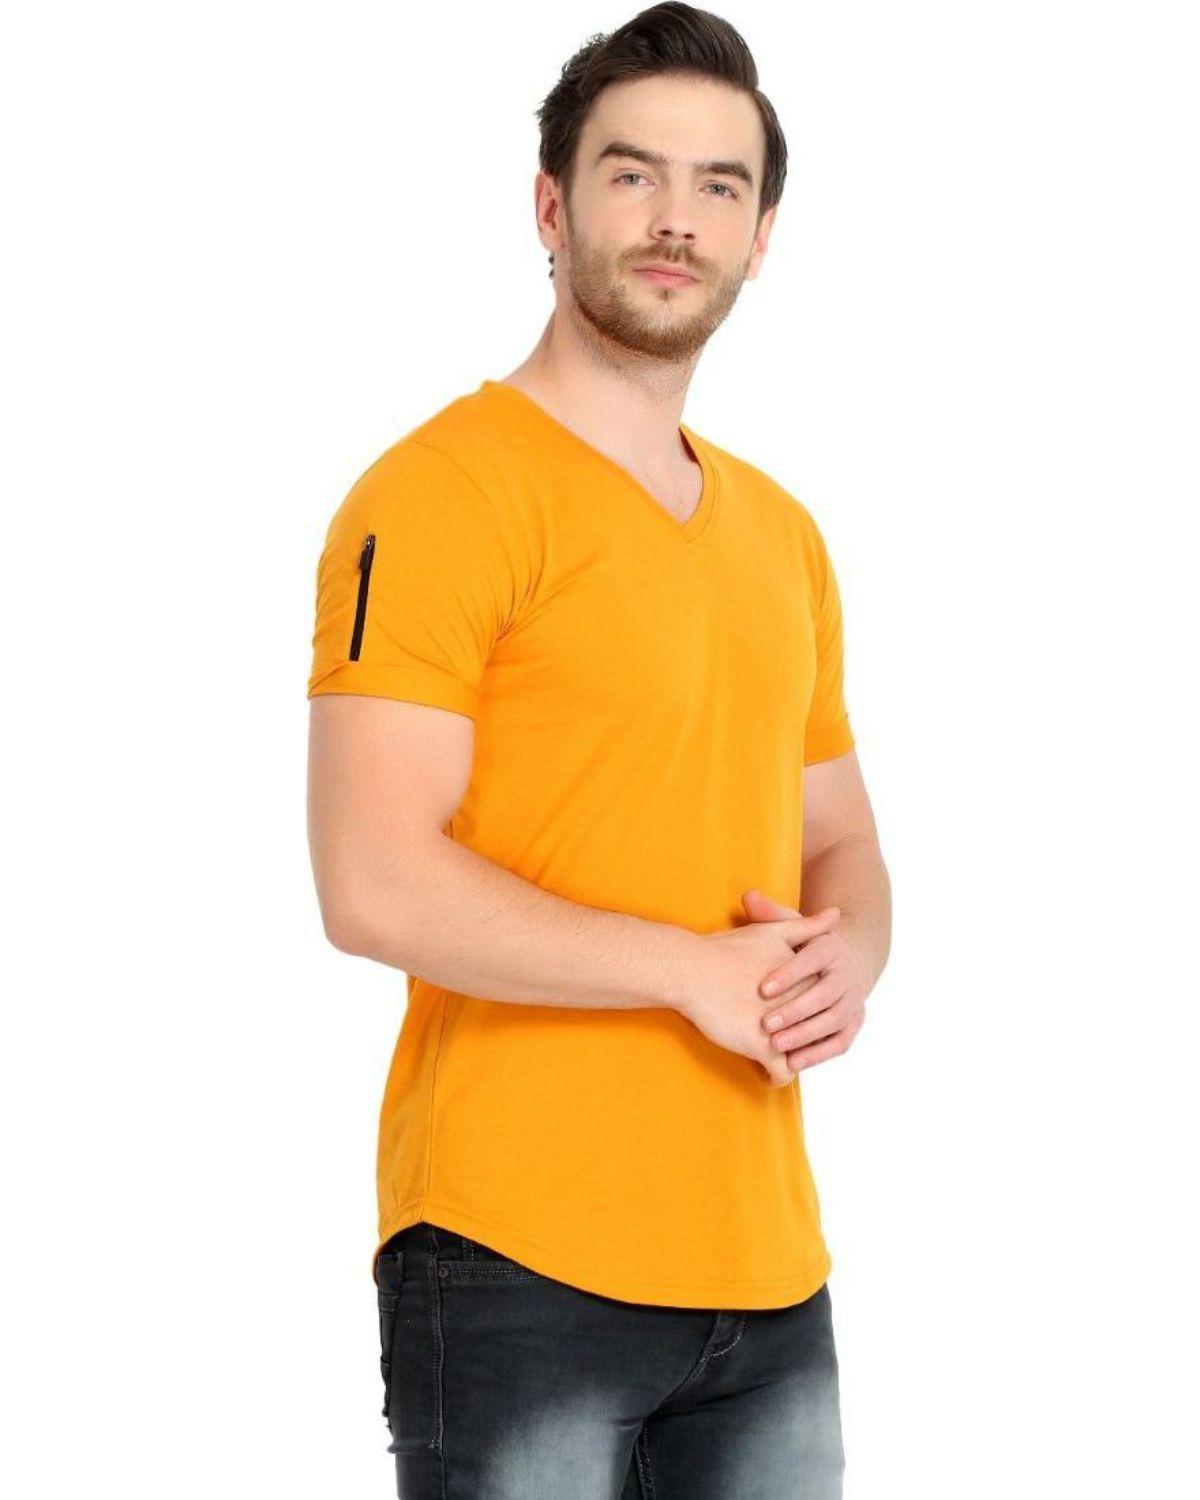 Cotton Blend Solid Half Sleeves Stylish Neck Mens T-Shirt Pack Of 3